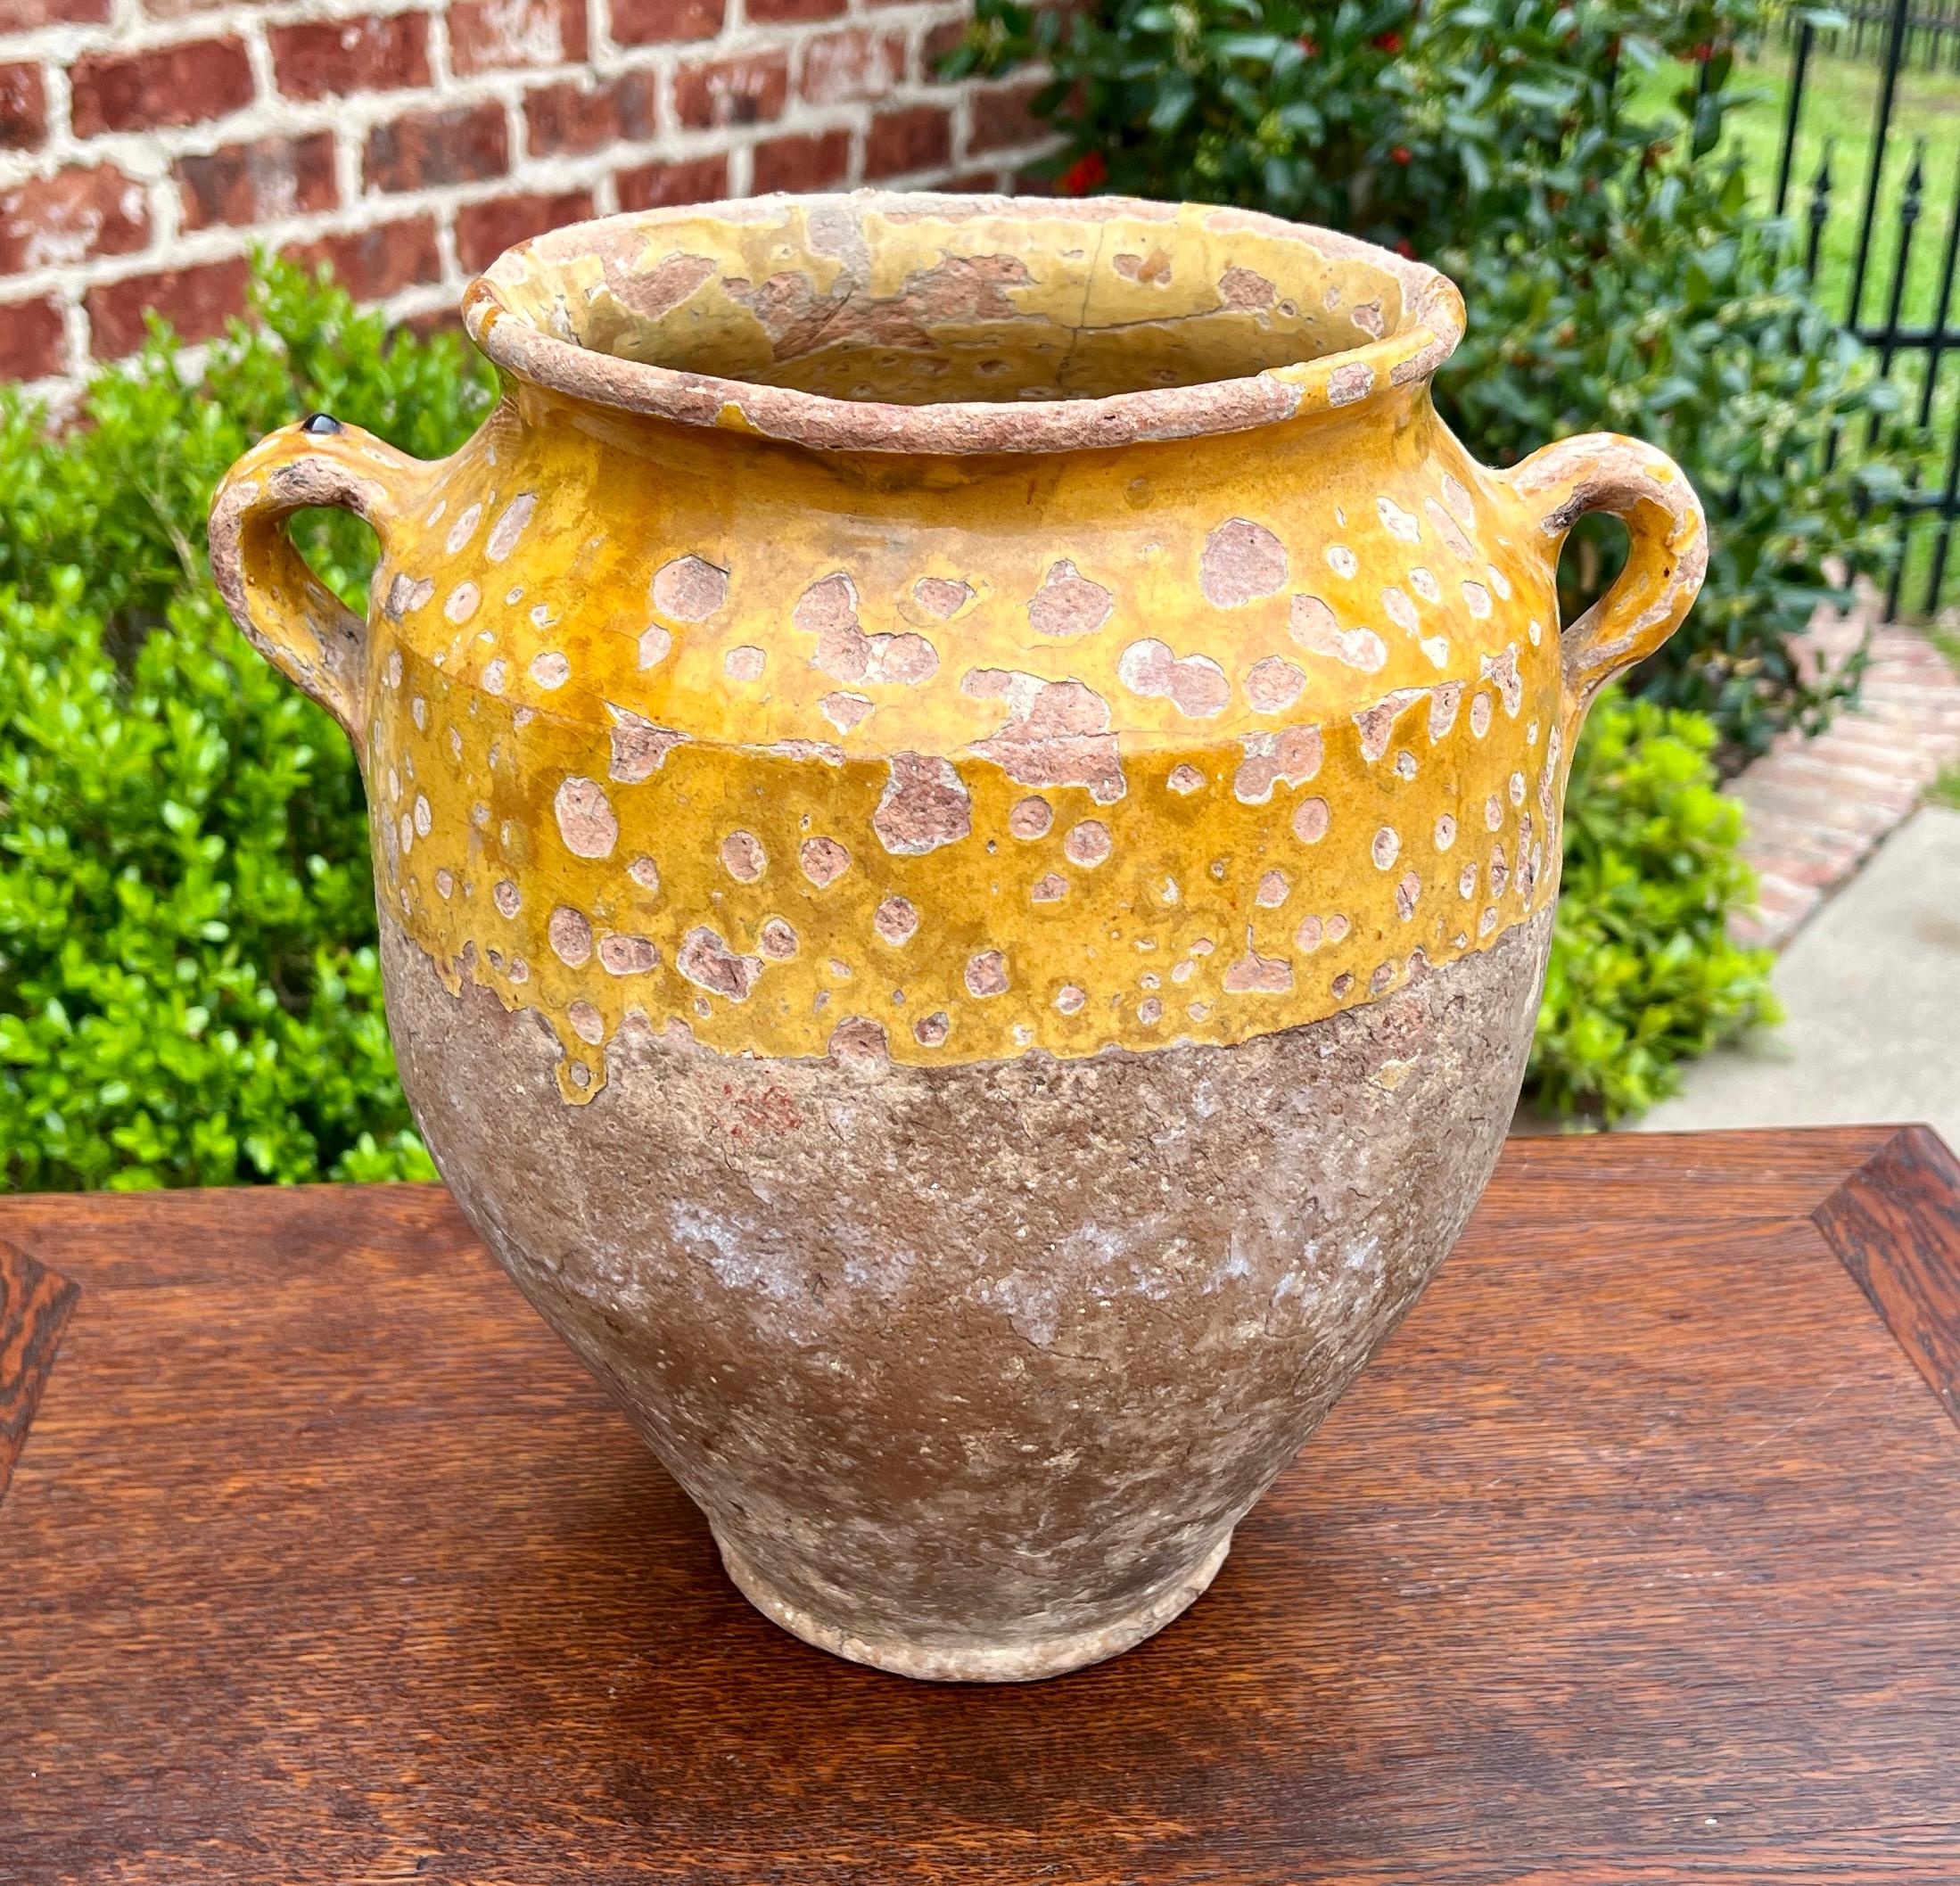 French Provincial Antique French Country Confit Pot Pottery Jar Jug Glazed Yellow Ochre Large #1 For Sale